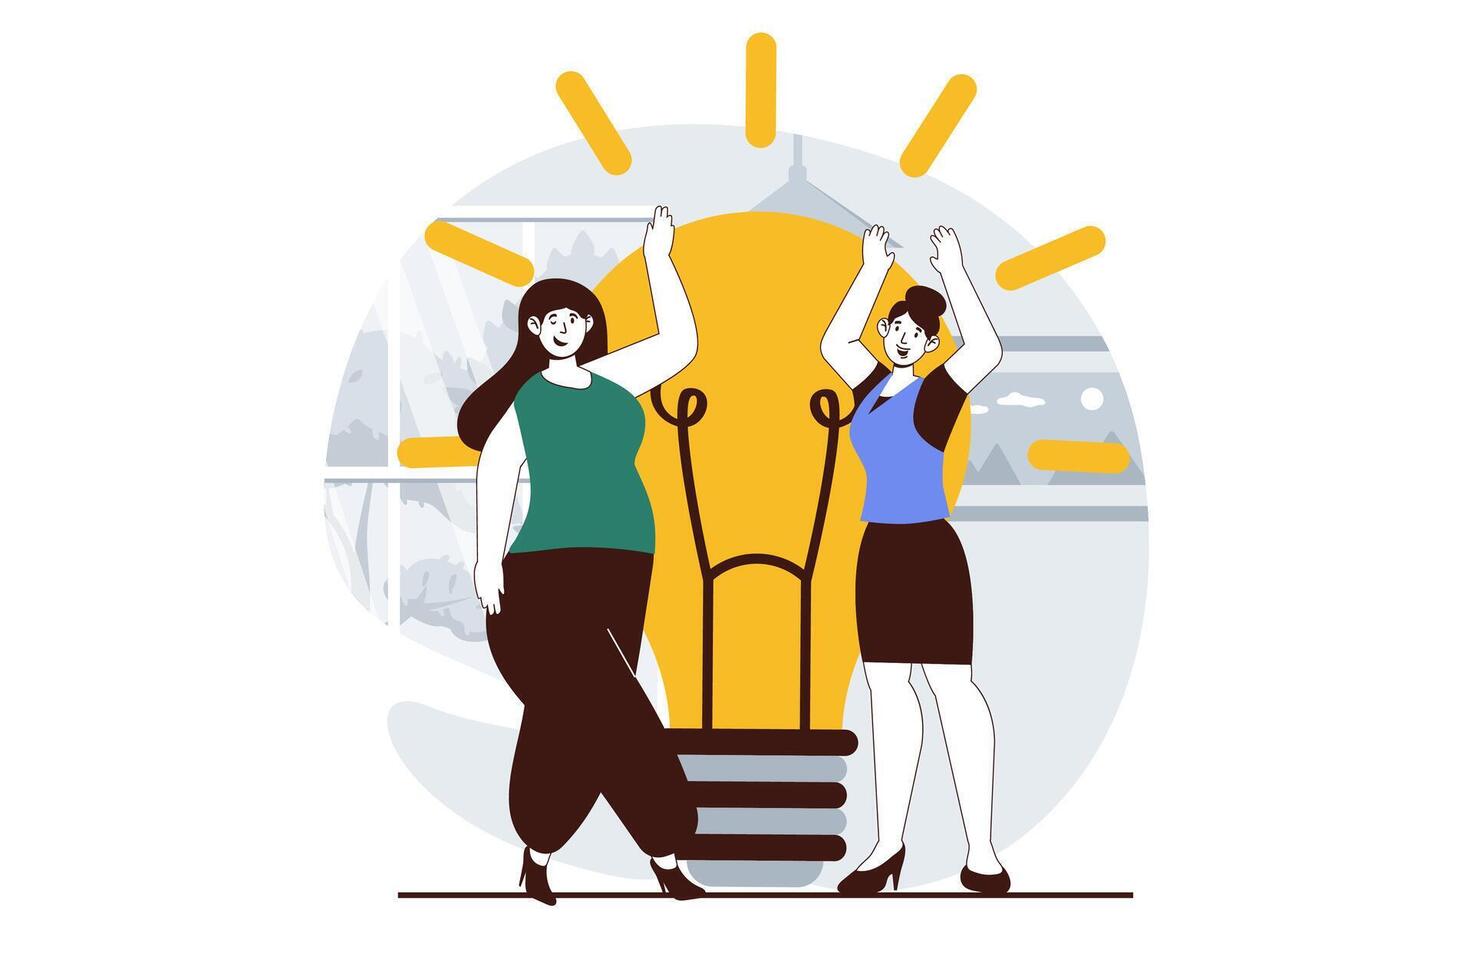 Teamwork concept with people scene in flat design for web. Women collaborating and cooperating on project, brainstorming at meeting. Vector illustration for social media banner, marketing material.